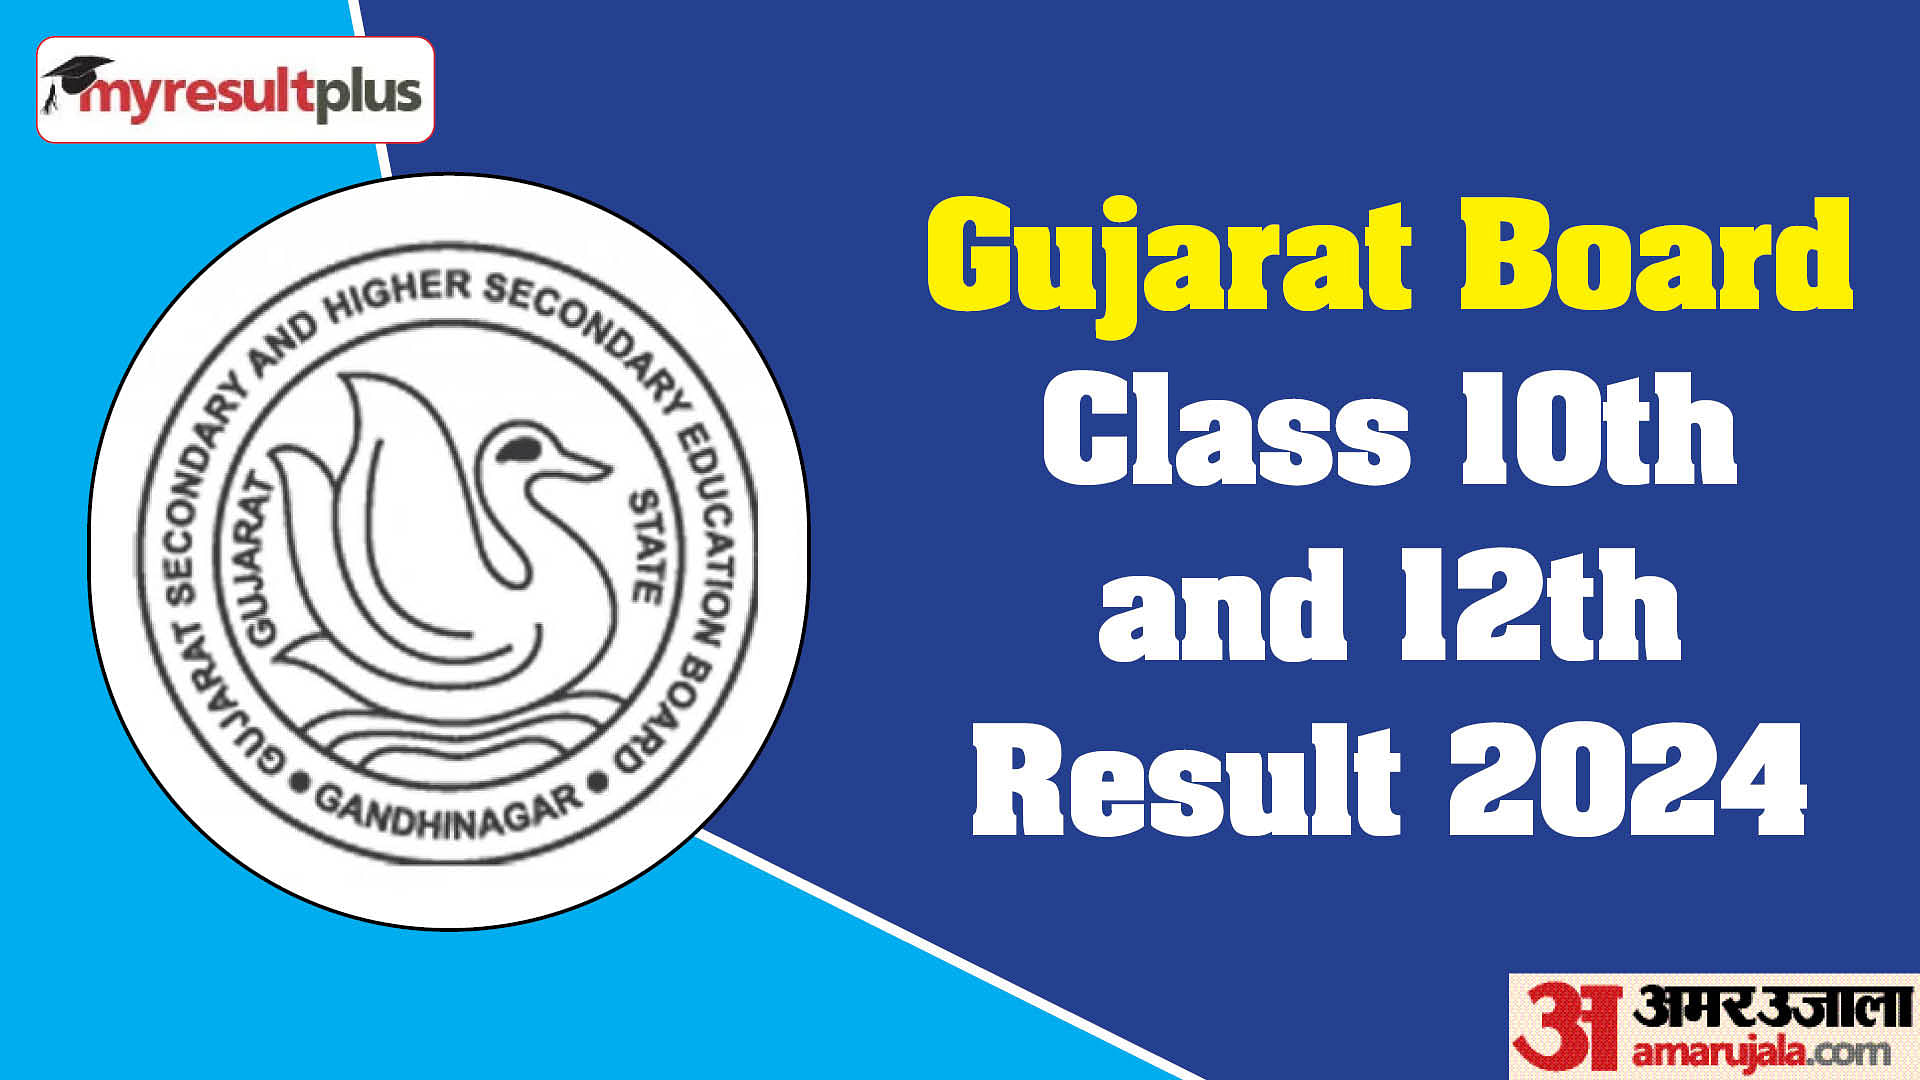 GSEB 2024 Results: Gujarat Board to declare the results for 10th, 12th classes soon, Check more details here